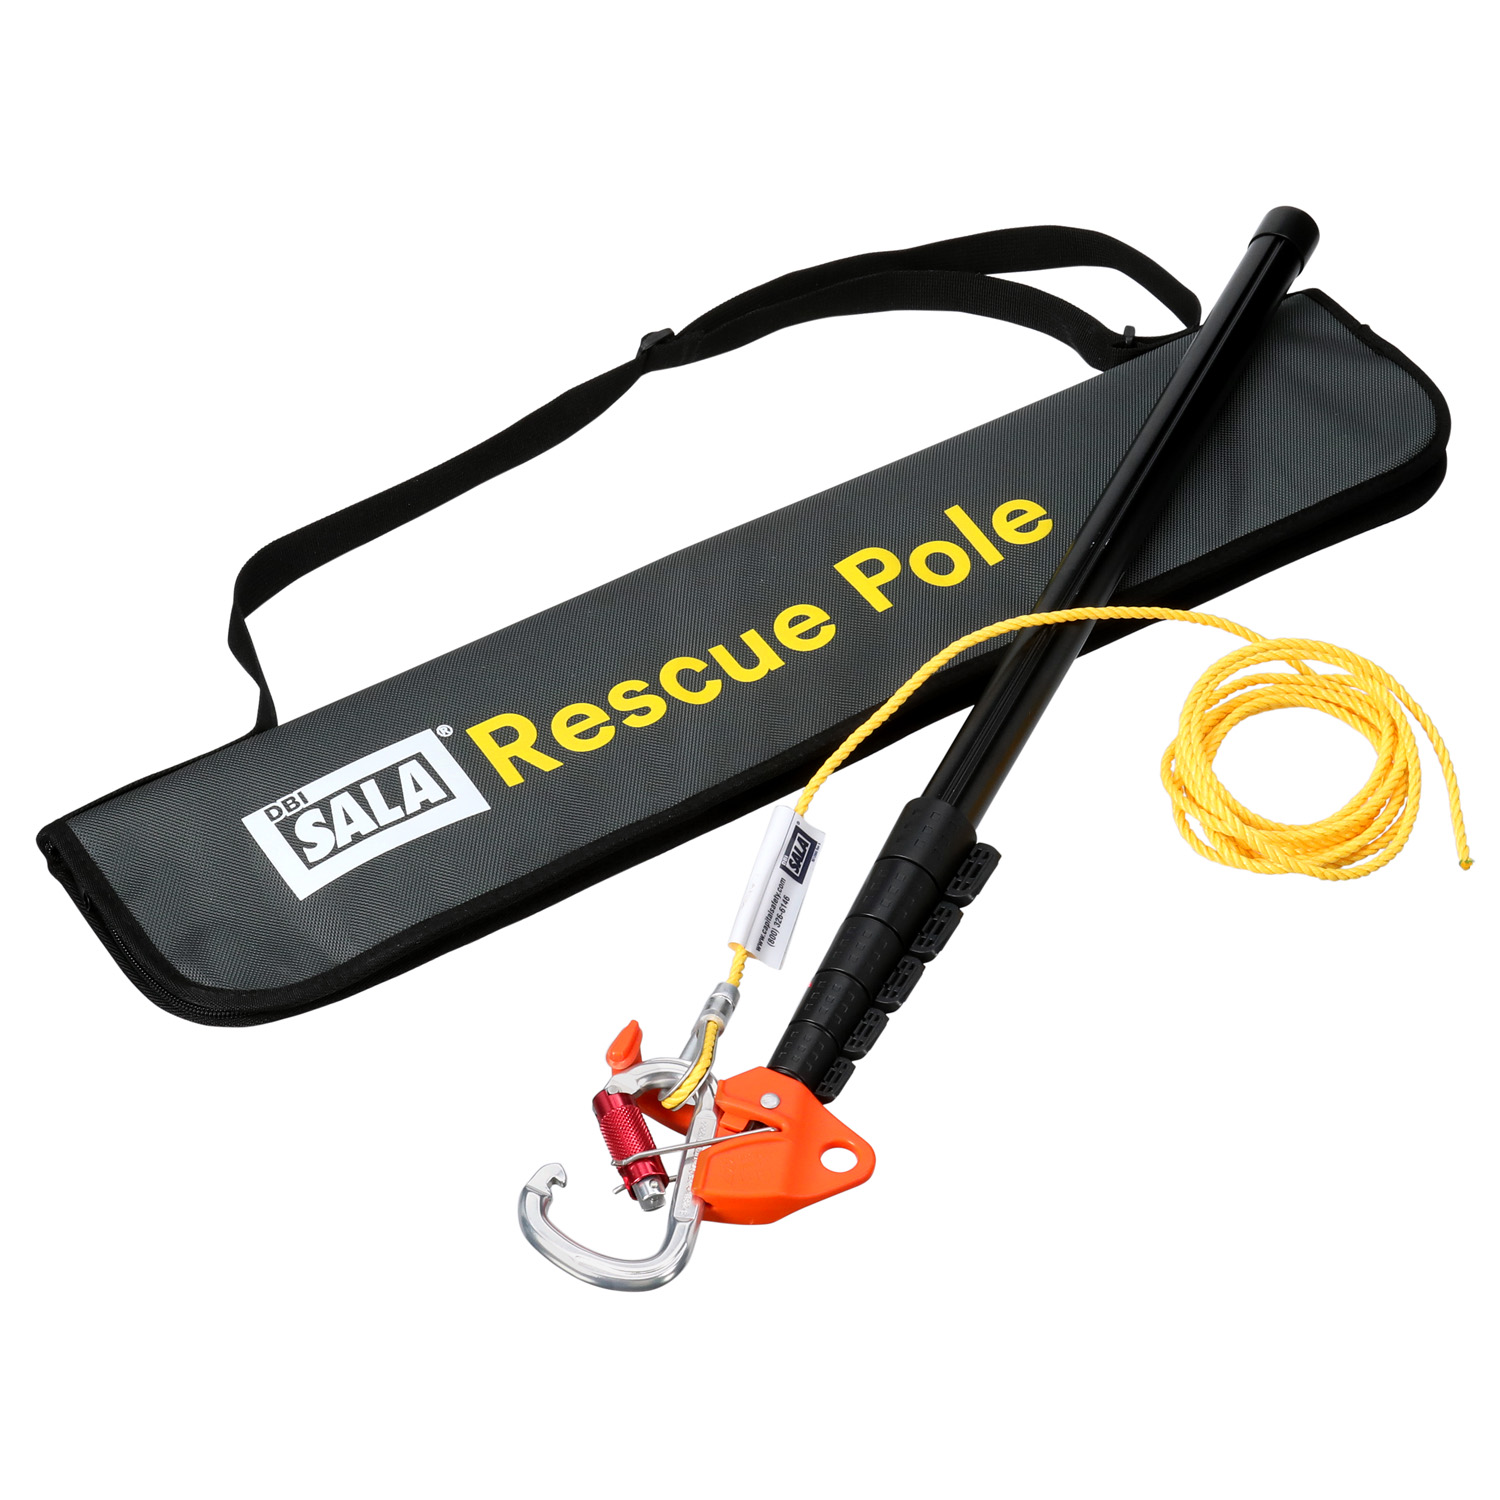 3M DBI Sala Rescue Pole from Columbia Safety